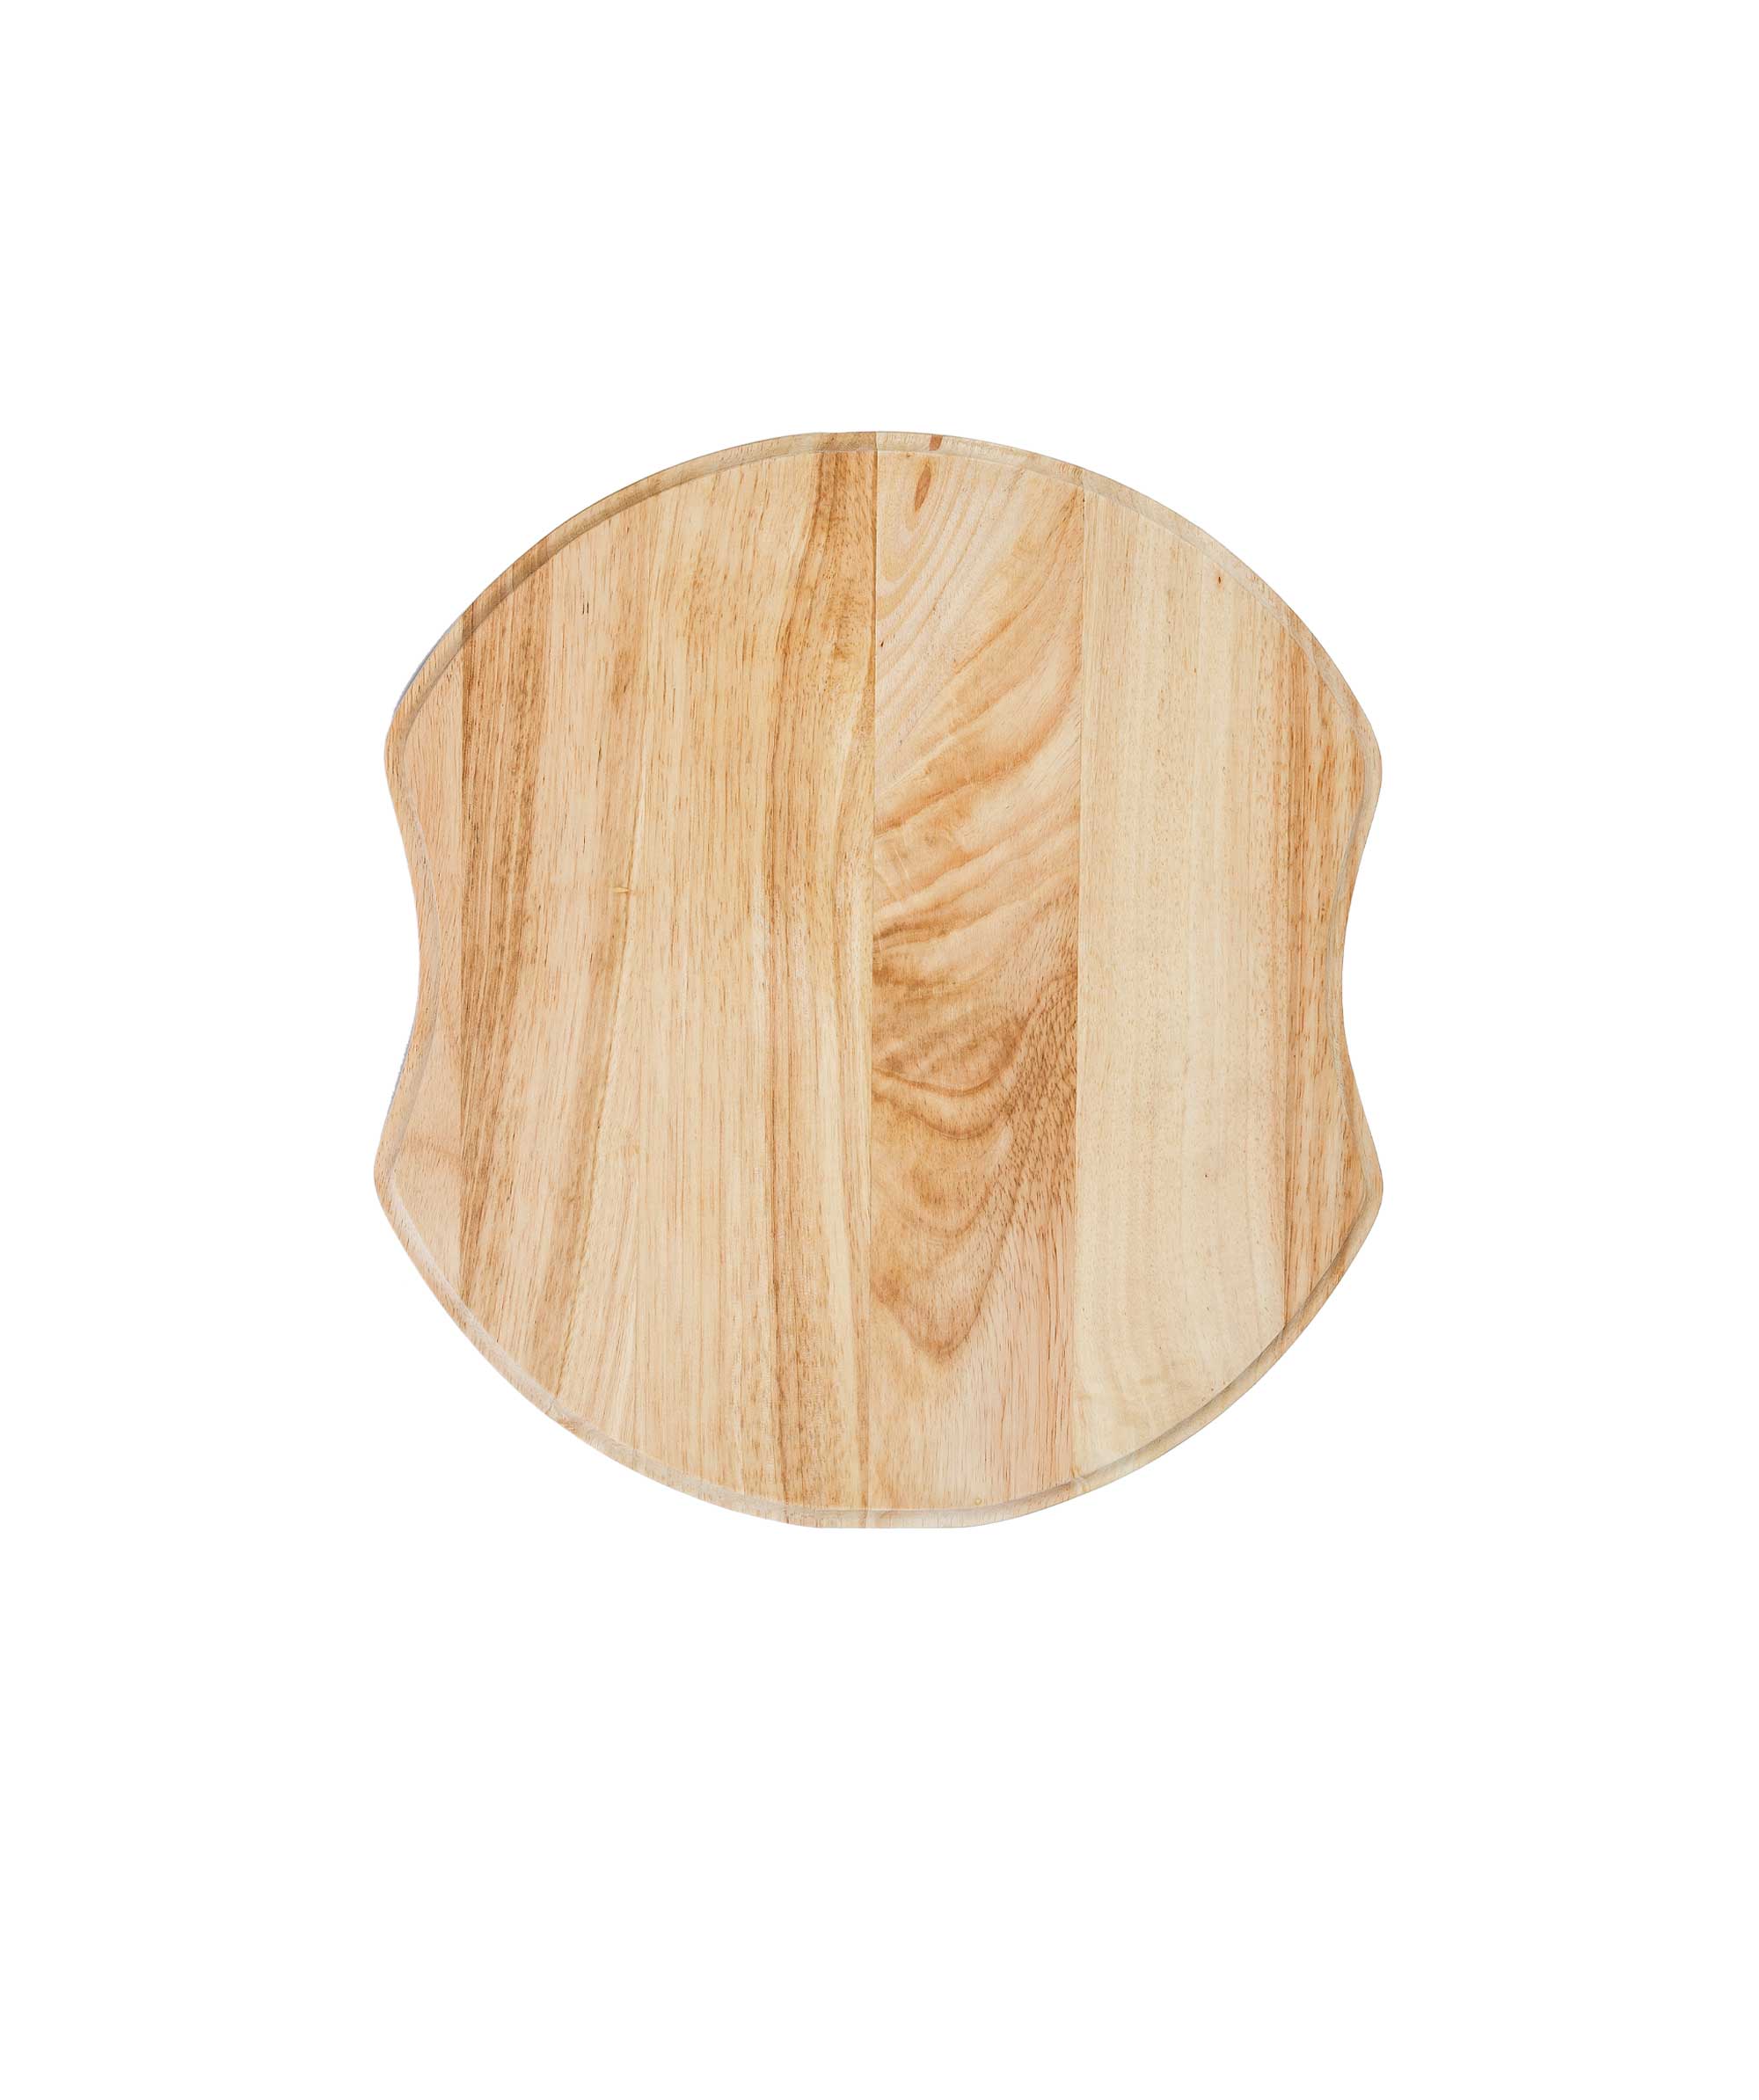 Cutting Board - for Acero 003 round